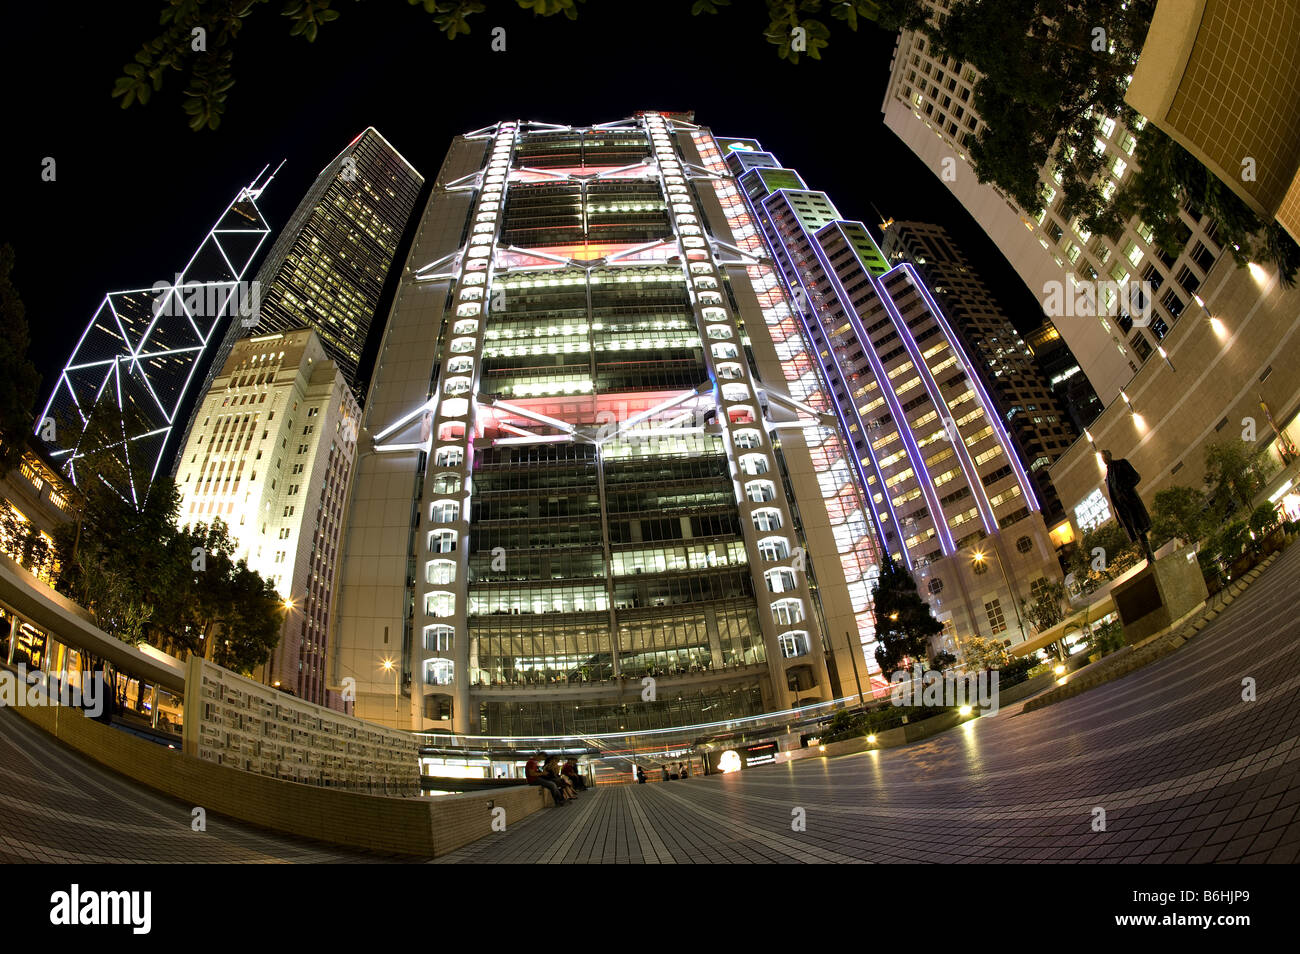 Statue Square at night in Central Hong Kong fisheye lens Stock Photo - Alamy